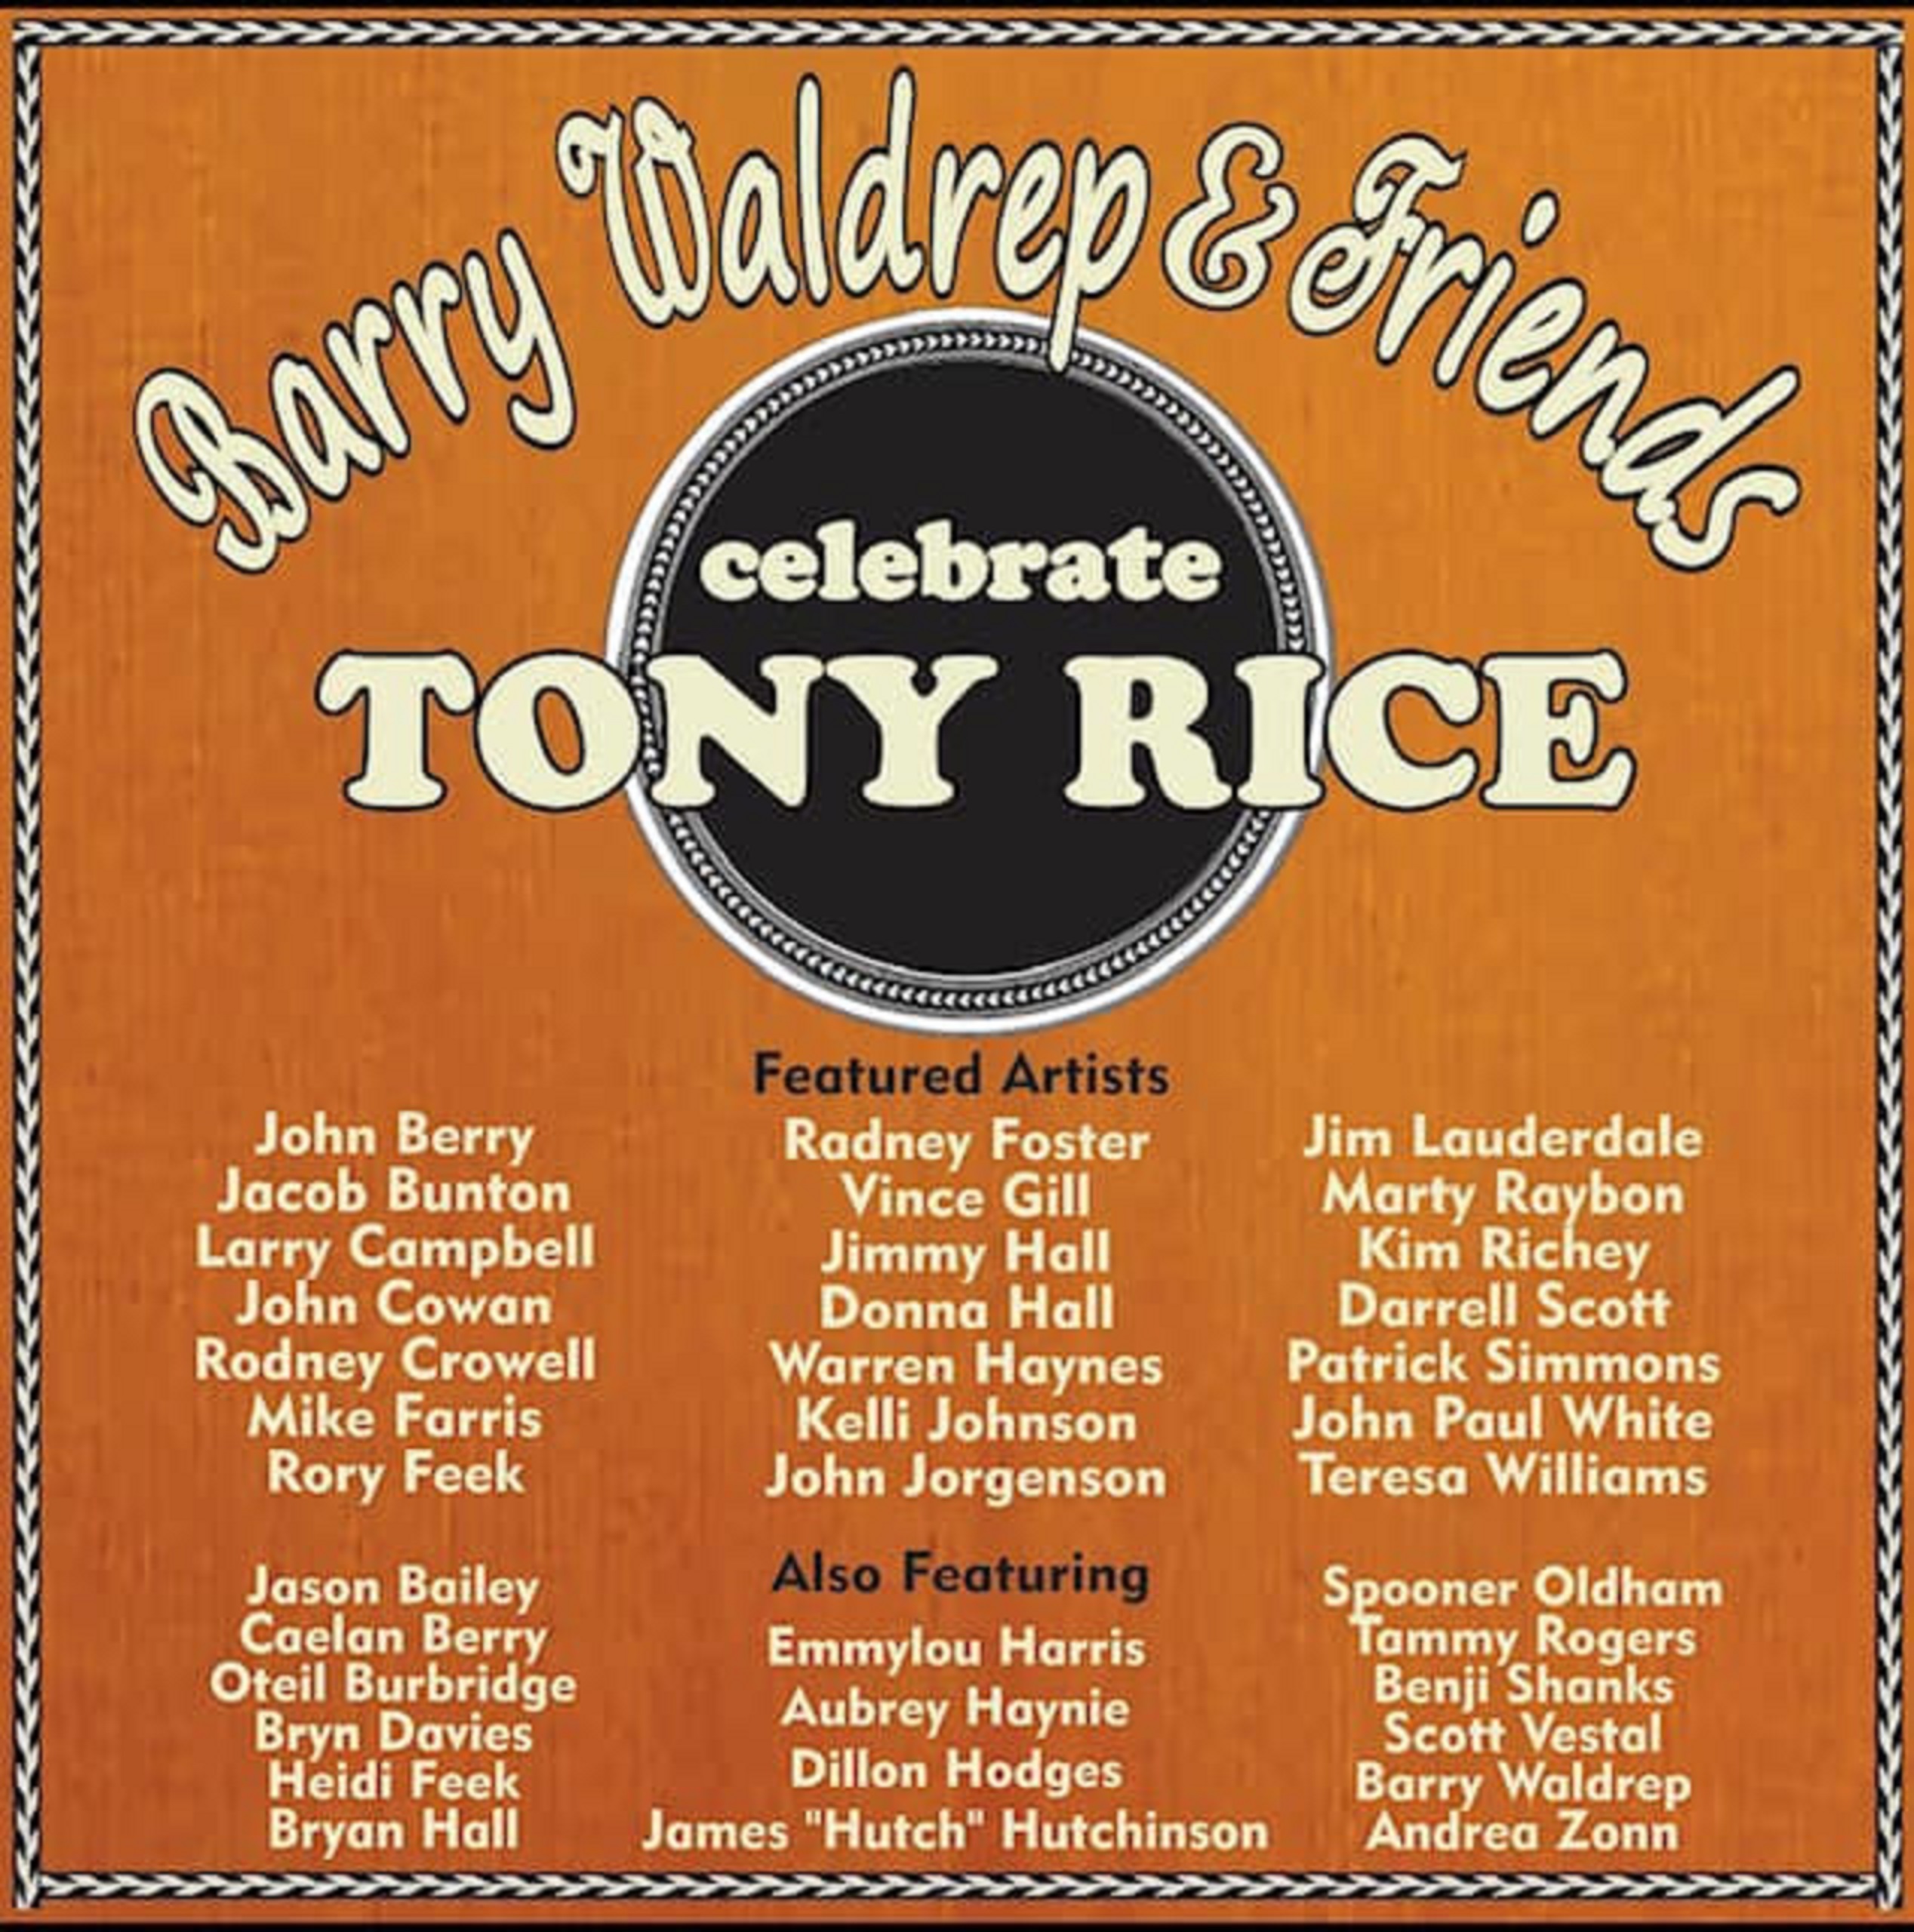  Barry Waldrep and Friends Celebrate Tony Rice available digitally today